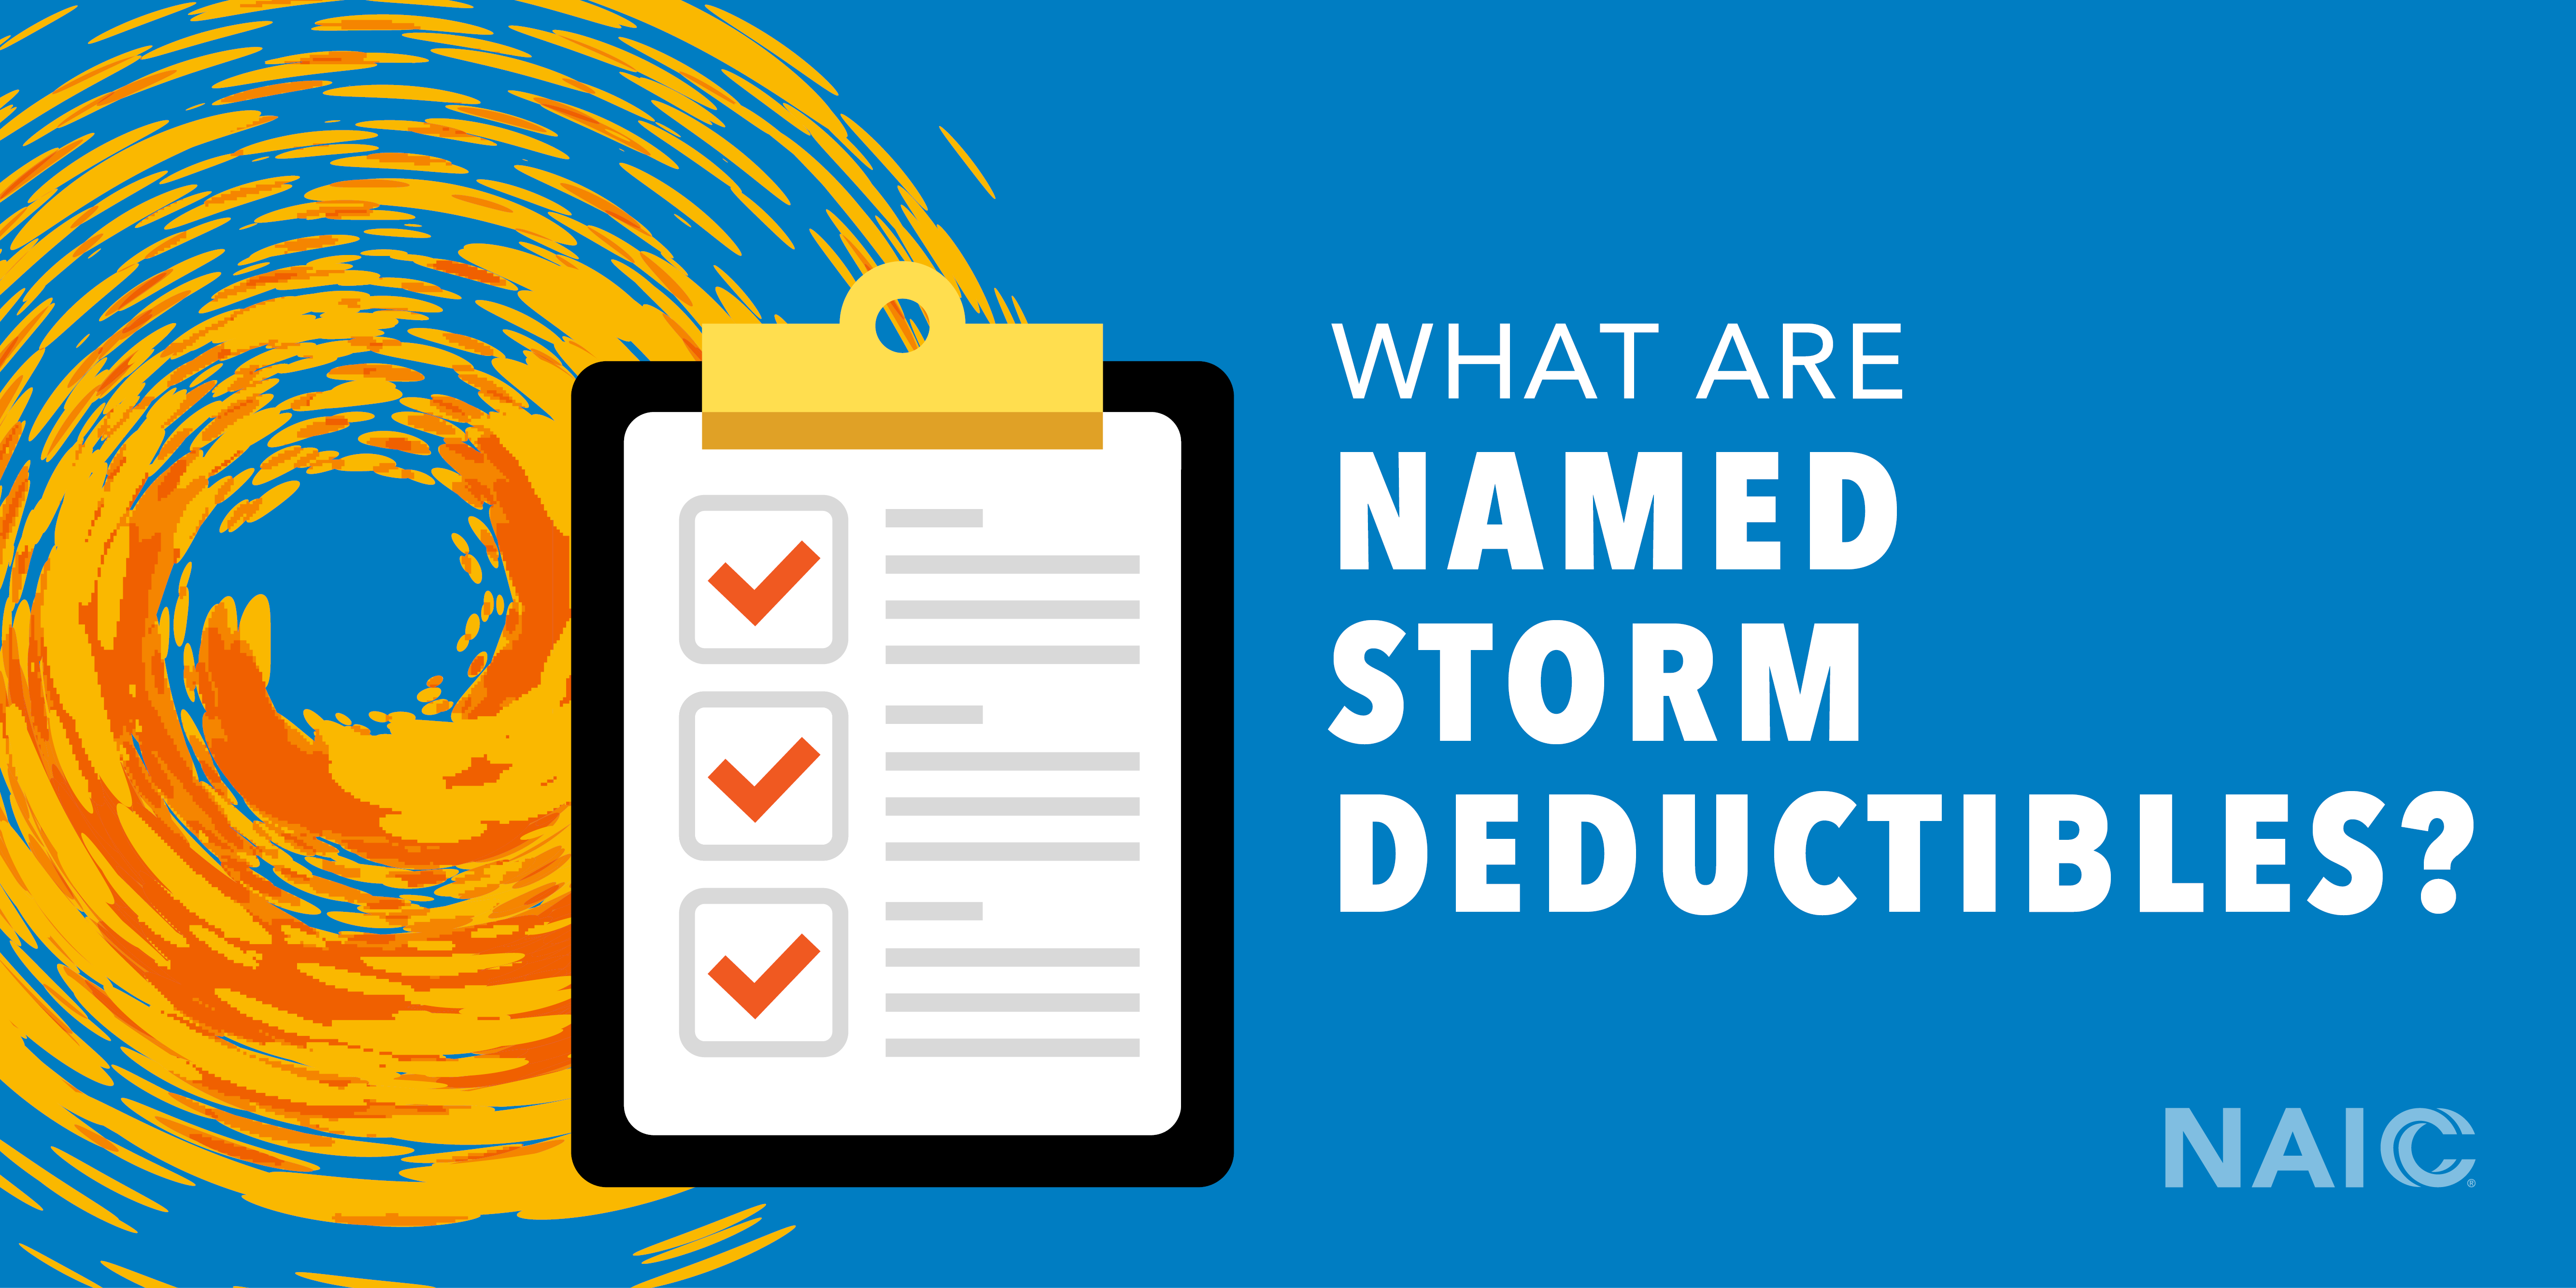 What are named storm deductibles? there is a yellow and orange swirl on the left and a clip board with a white paper on it, with orange check marks to indicate a list.